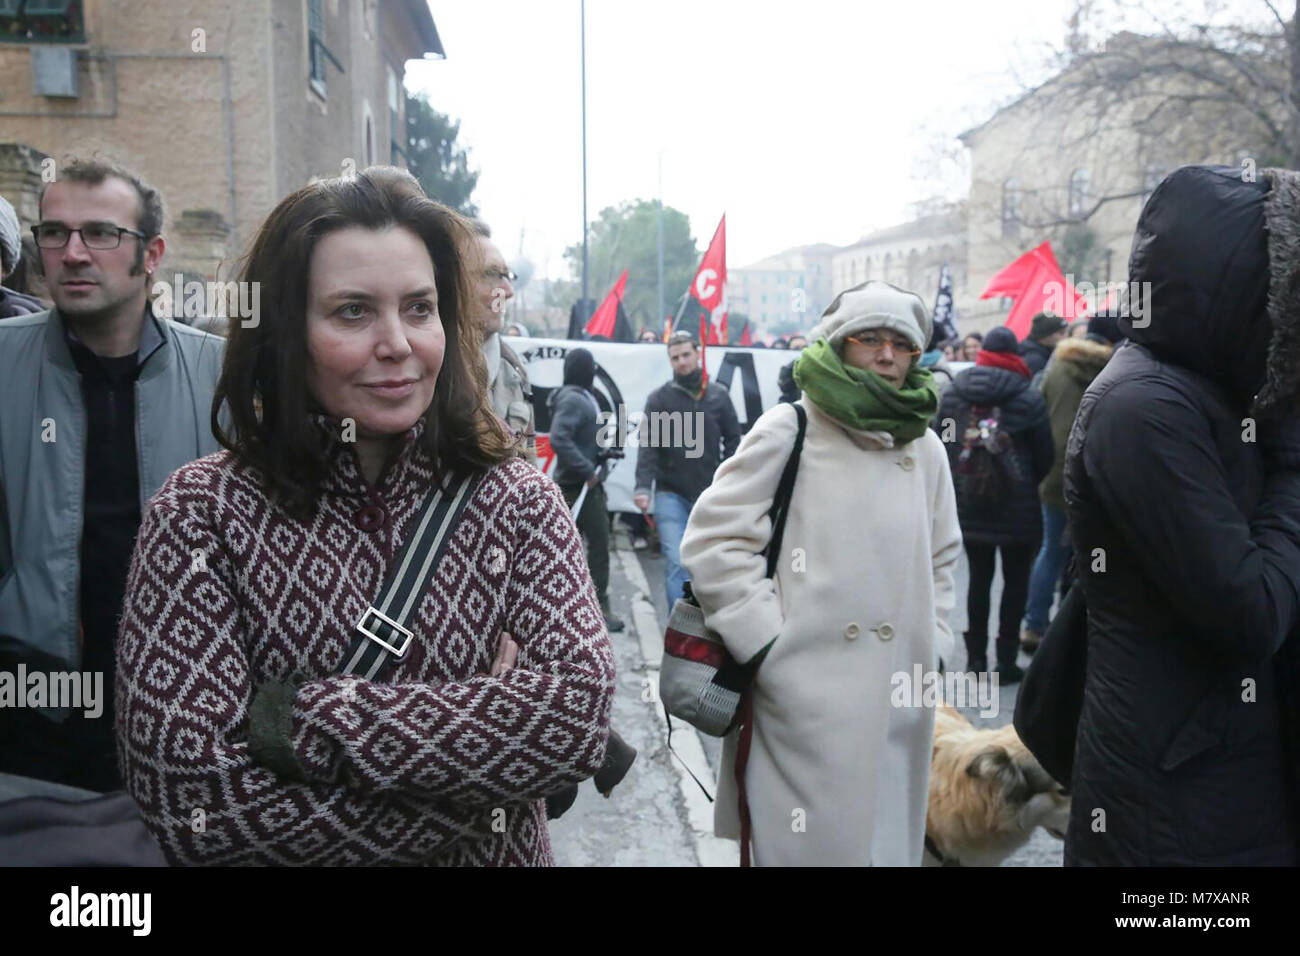 Anti-racist demonstration  Featuring: Sabrina Guzzanti Where: Macerata, Italy When: 10 Feb 2018 Credit: IPA/WENN.com  **Only available for publication in UK, USA, Germany, Austria, Switzerland** Stock Photo